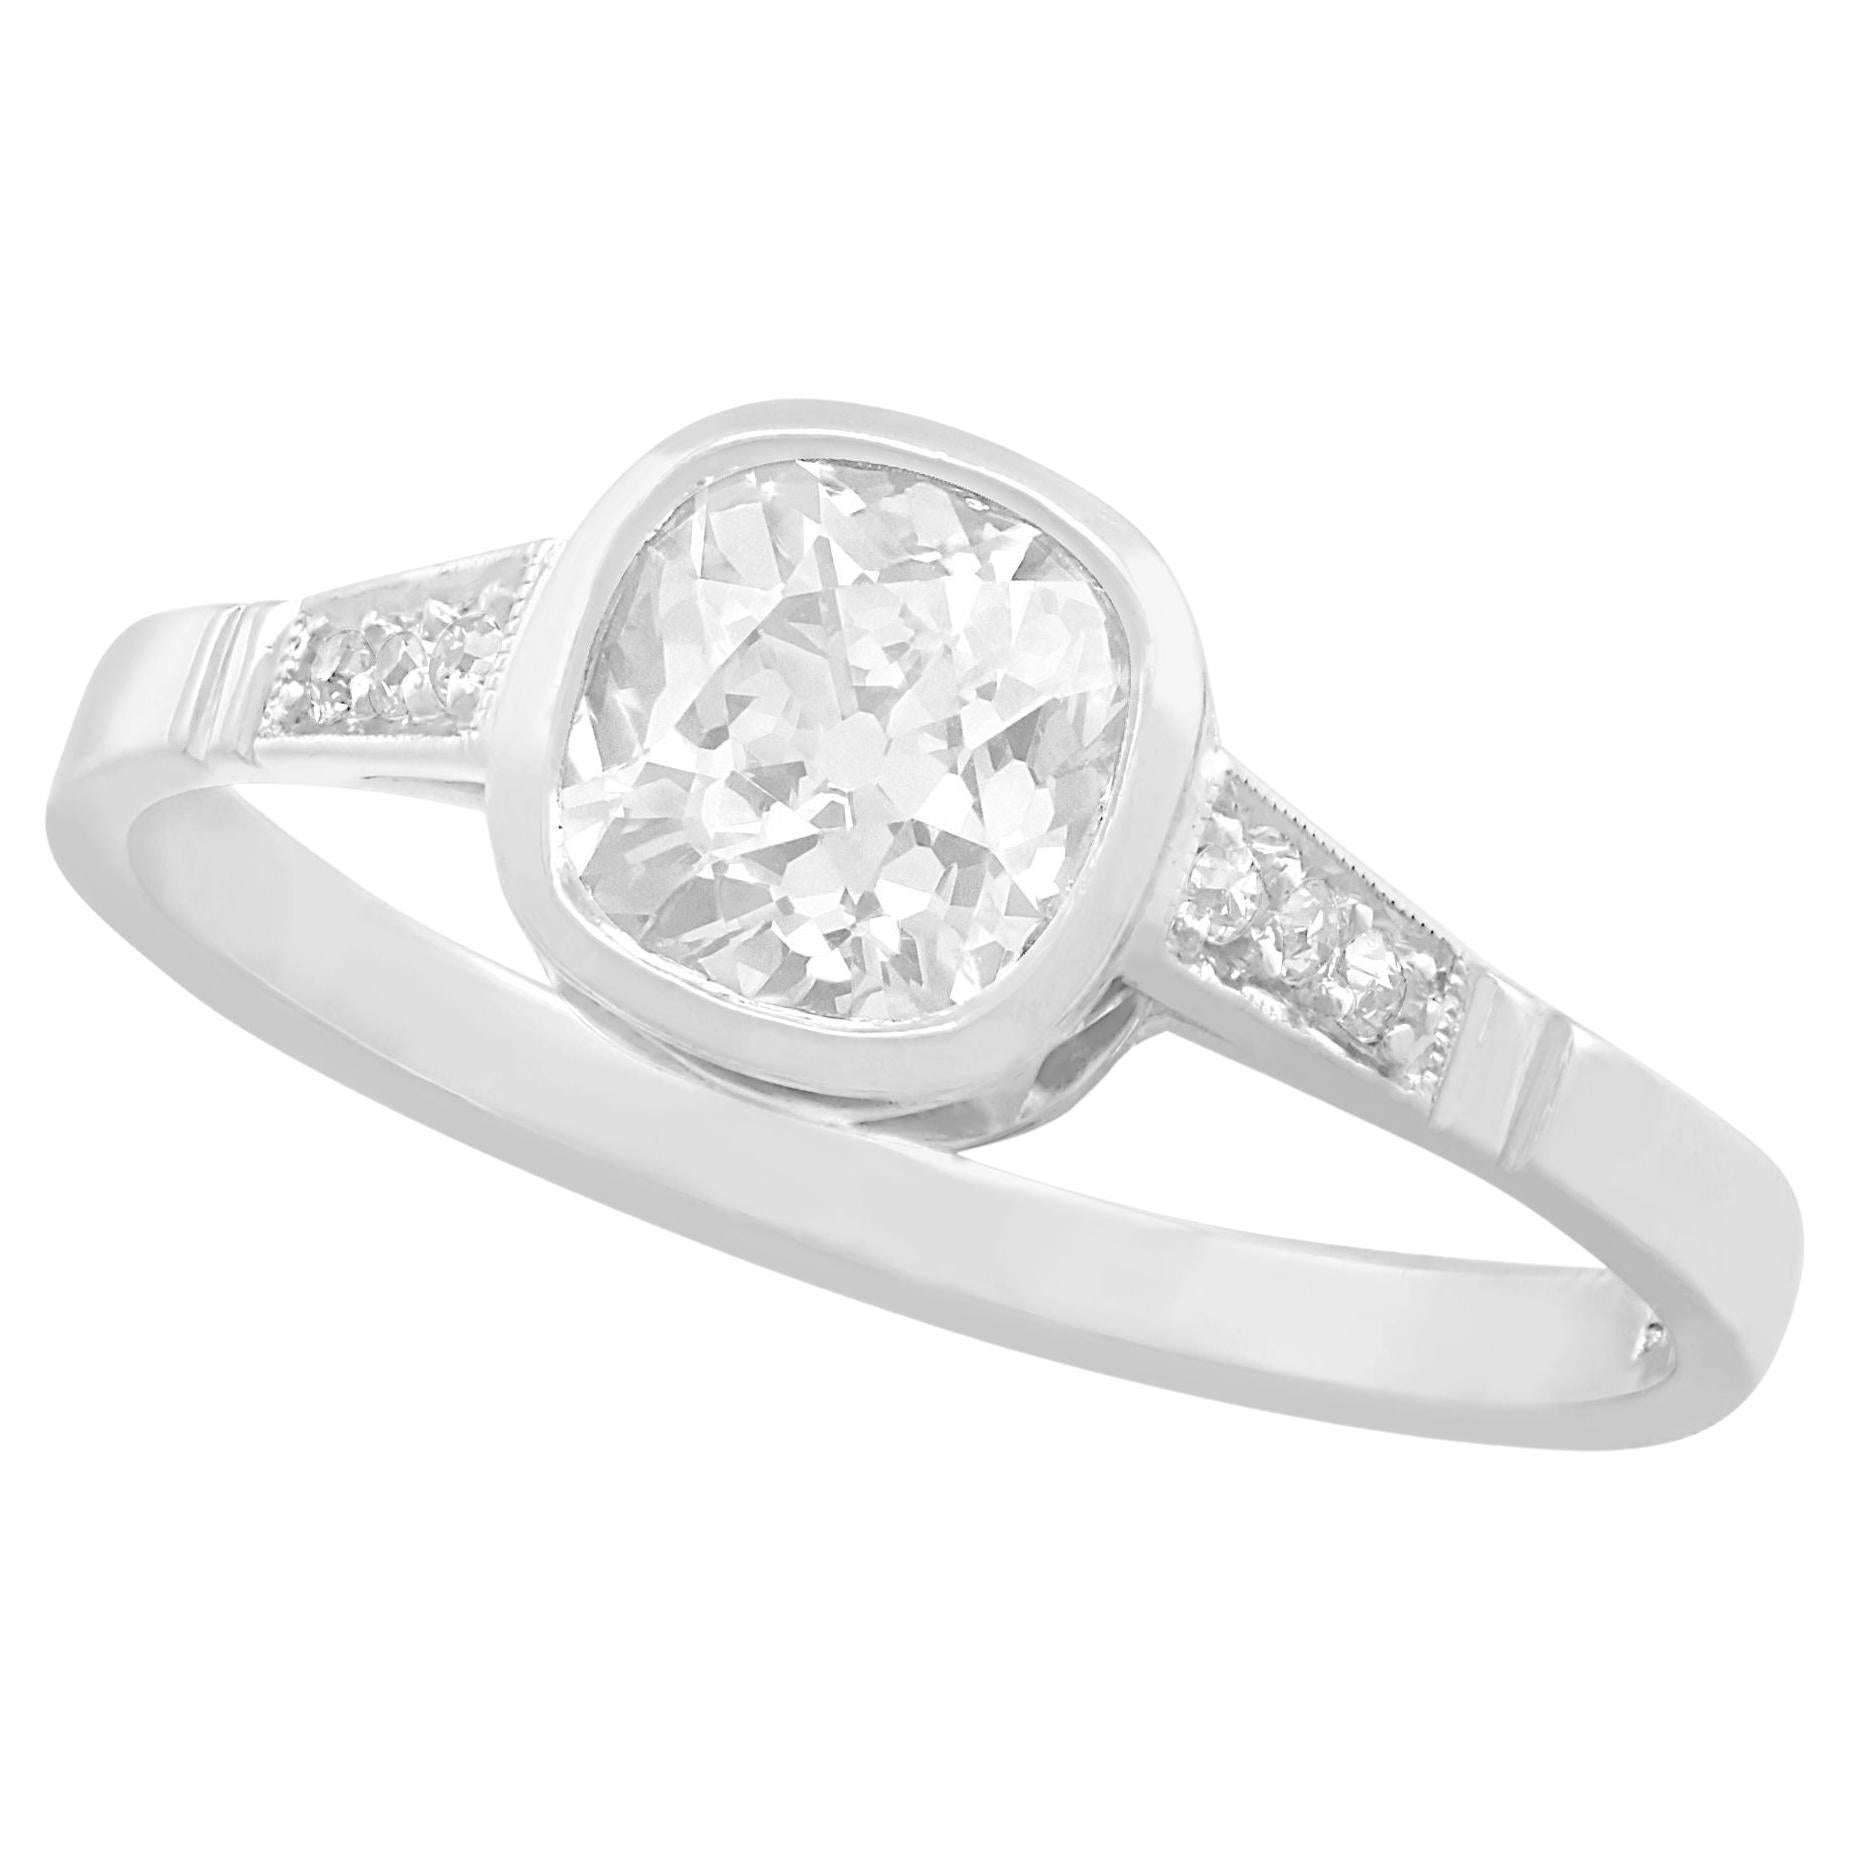 Antique 1.07 Carat Diamond and White Gold Solitaire Ring For Sale